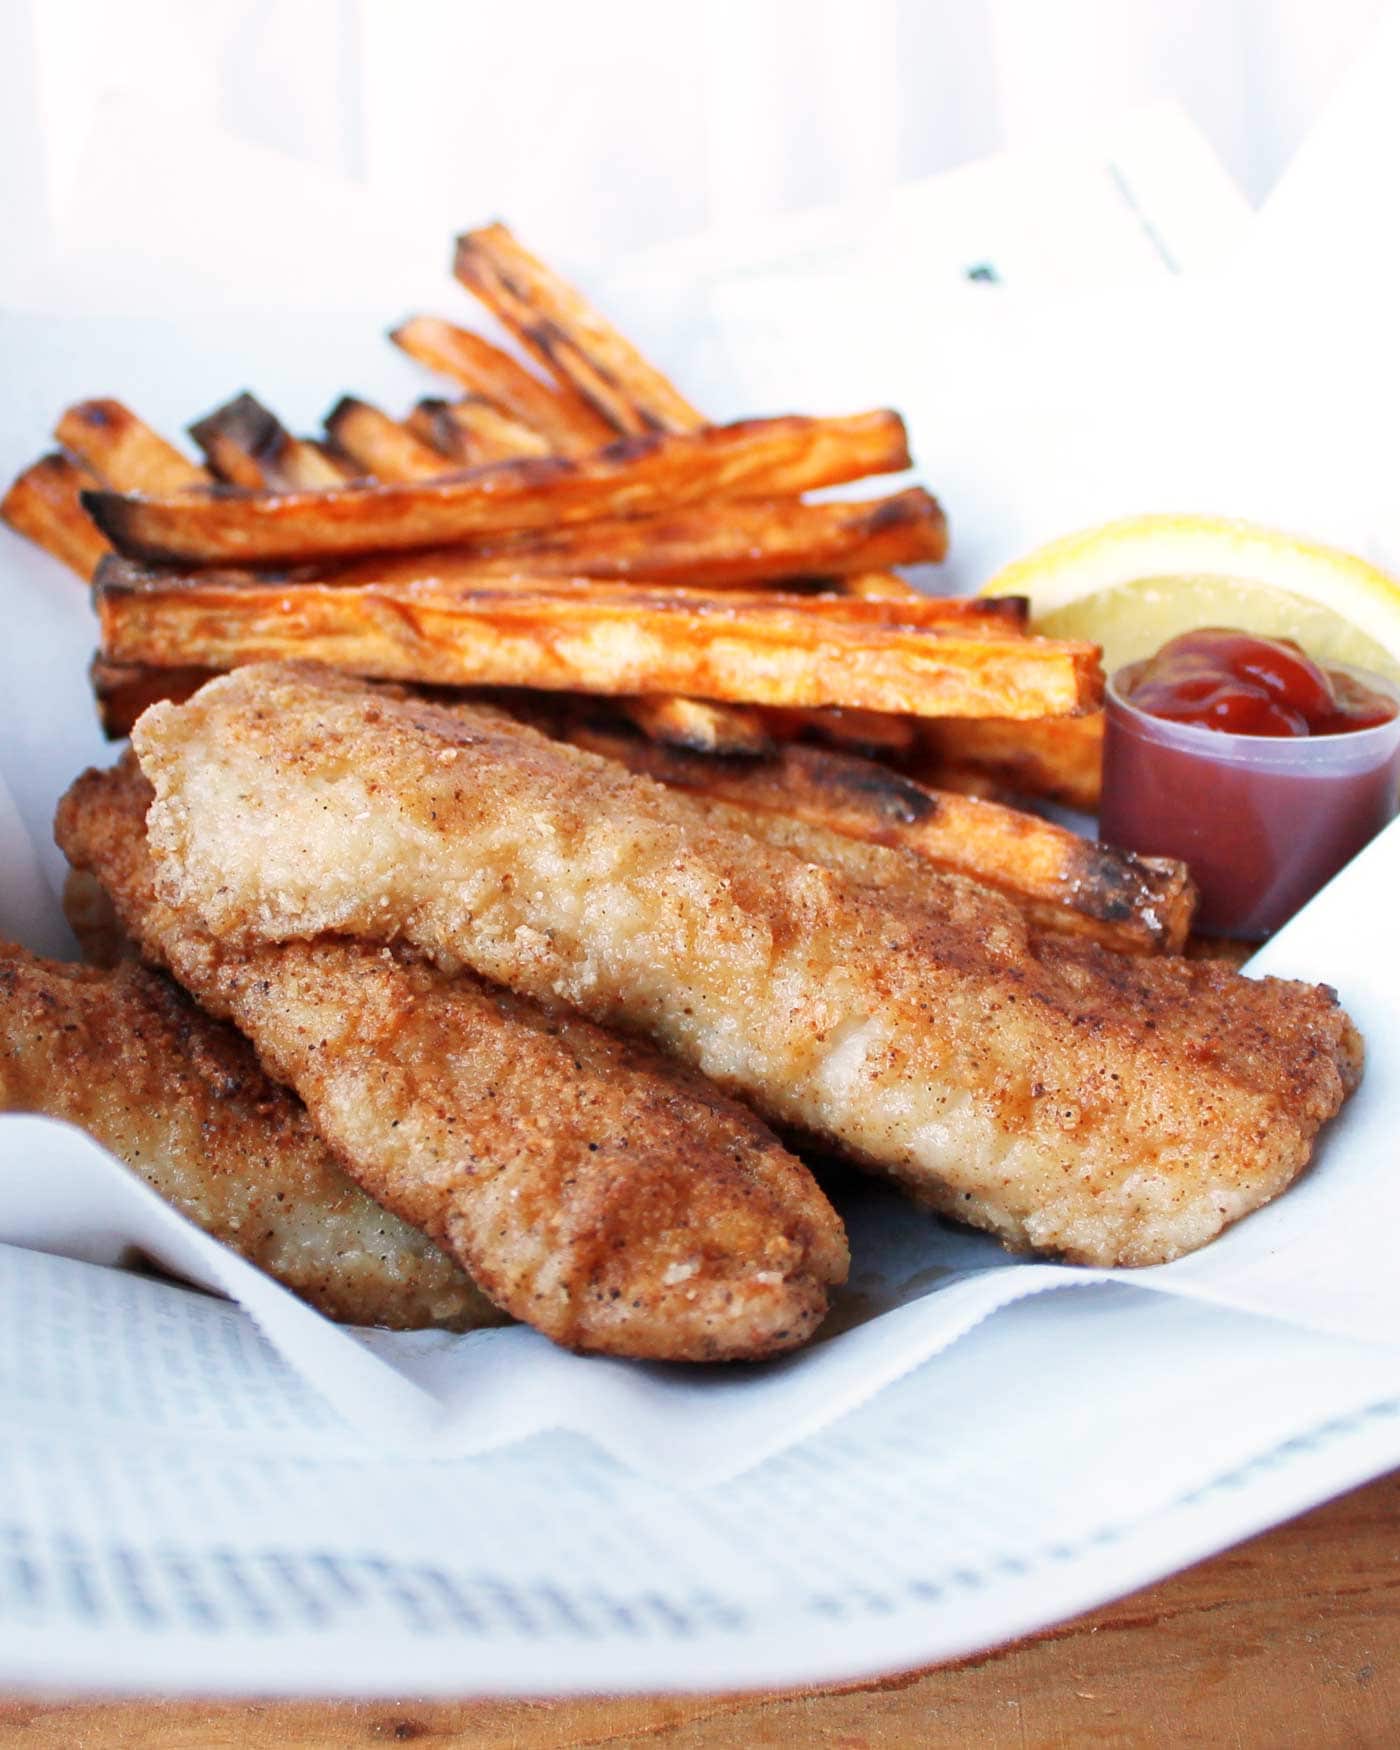 Fried fish made paleo! Easy to make and just as delicious as traditional fried fish! Gluten free, dairy free, low carb, keto.